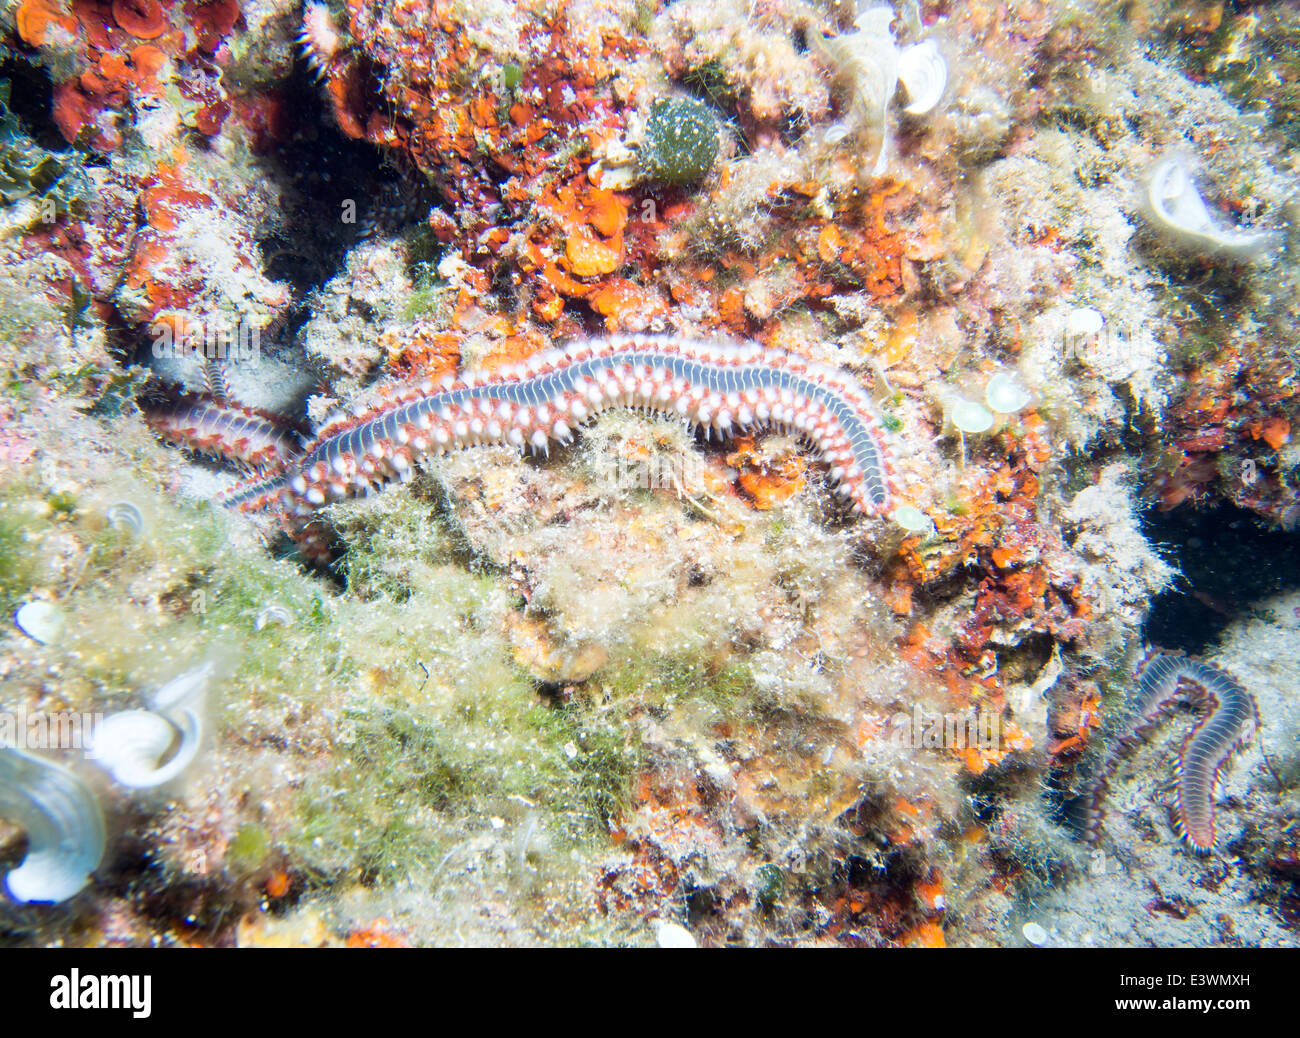 Group of colorful Fireworms on a reef wall Stock Photo